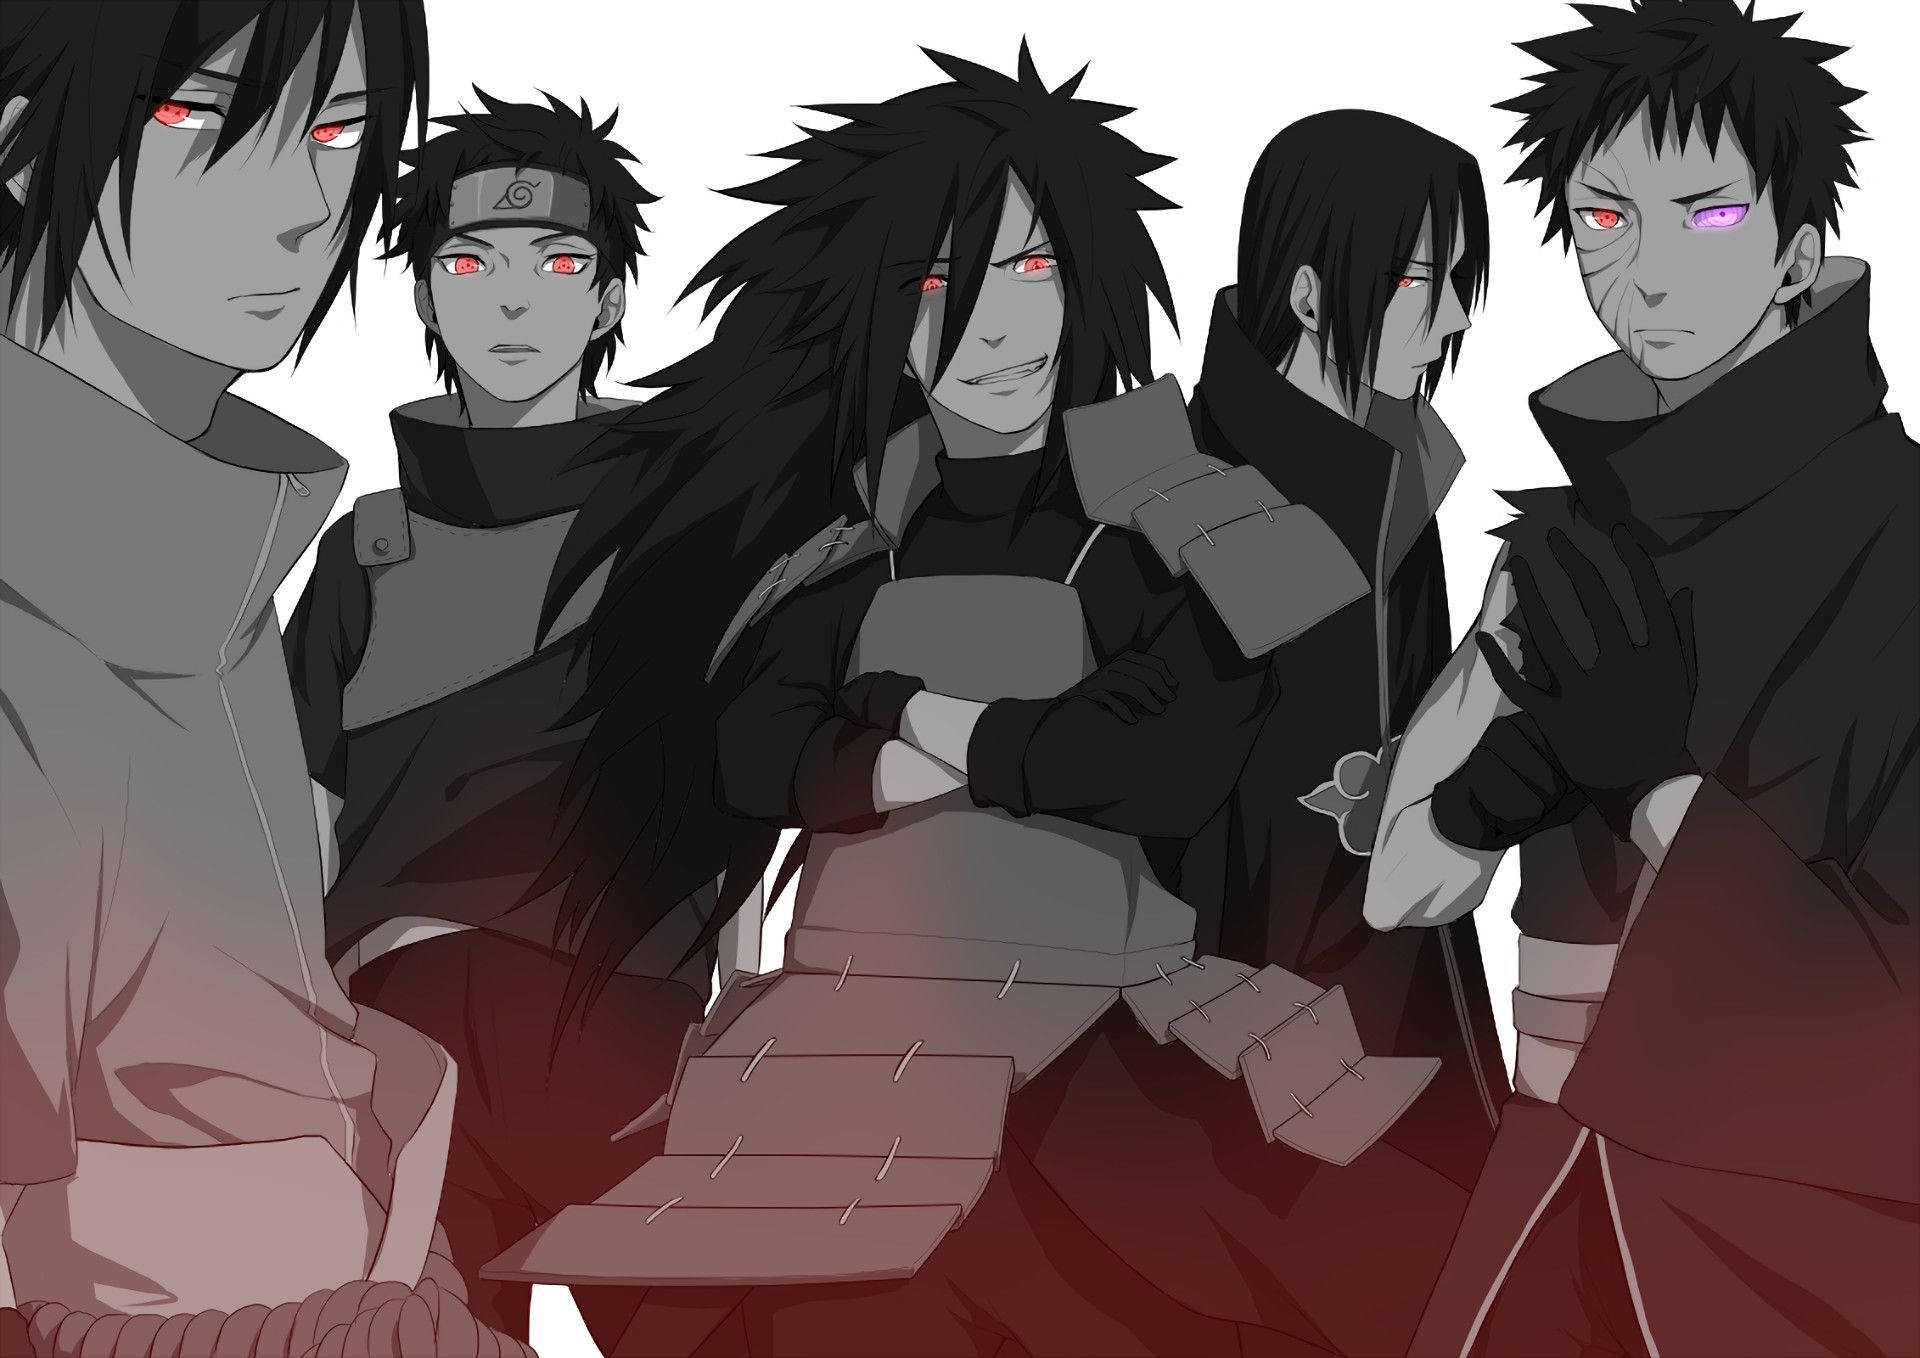 A solemn look of Itachi Uchiha, the leader of the Uchiha Clan. Wallpaper